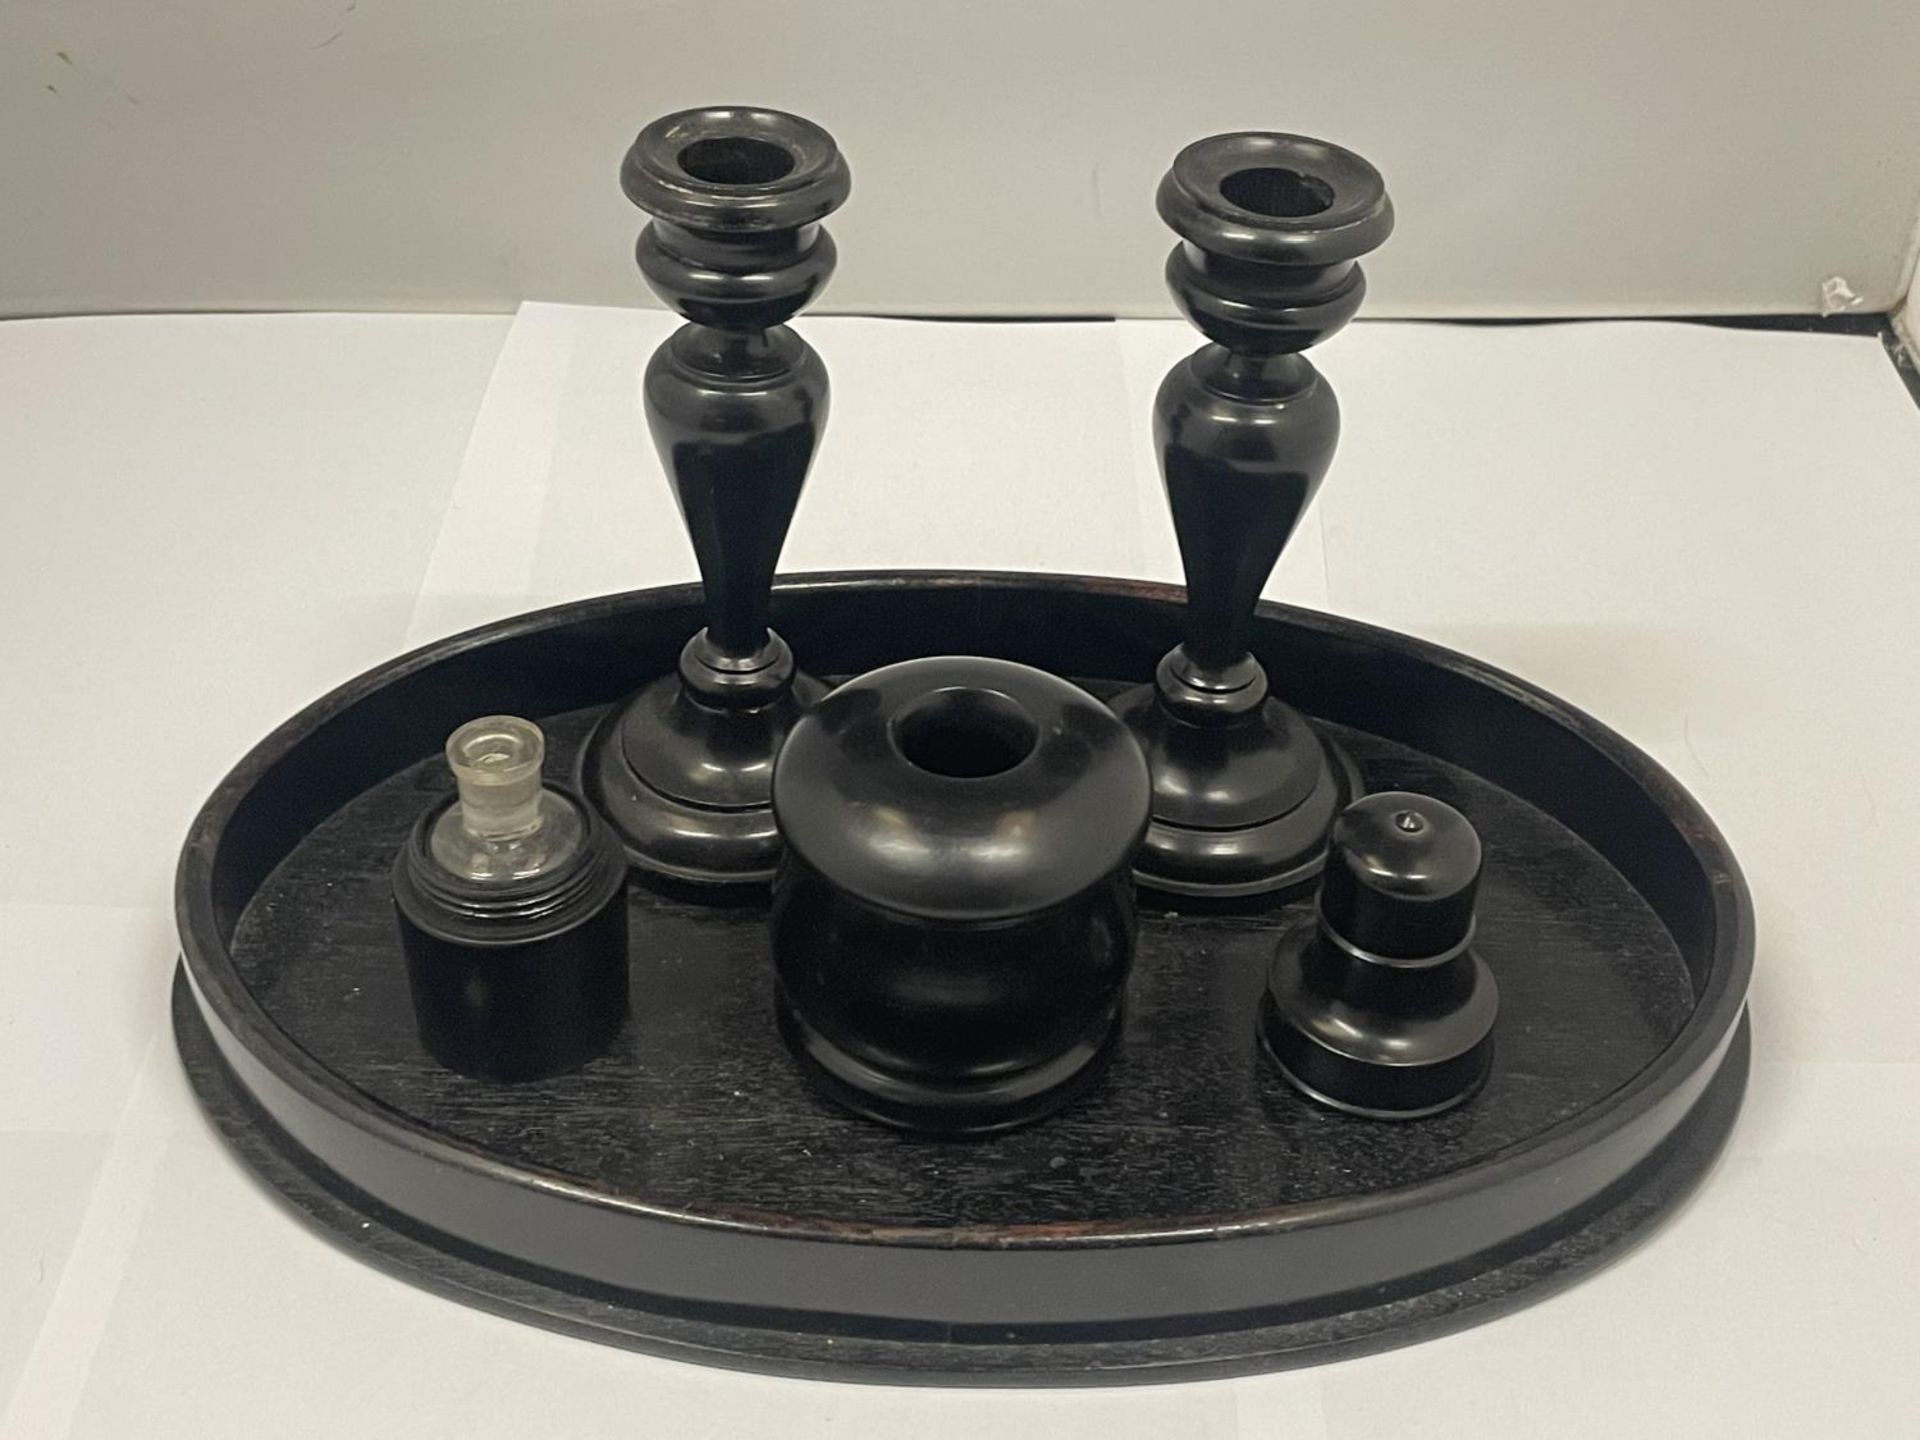 AN EBONY DRESSING TABLE SET TO INCLUDE A TRAY, CANDLESTICKS, PERFUME BOTTLE, ETC